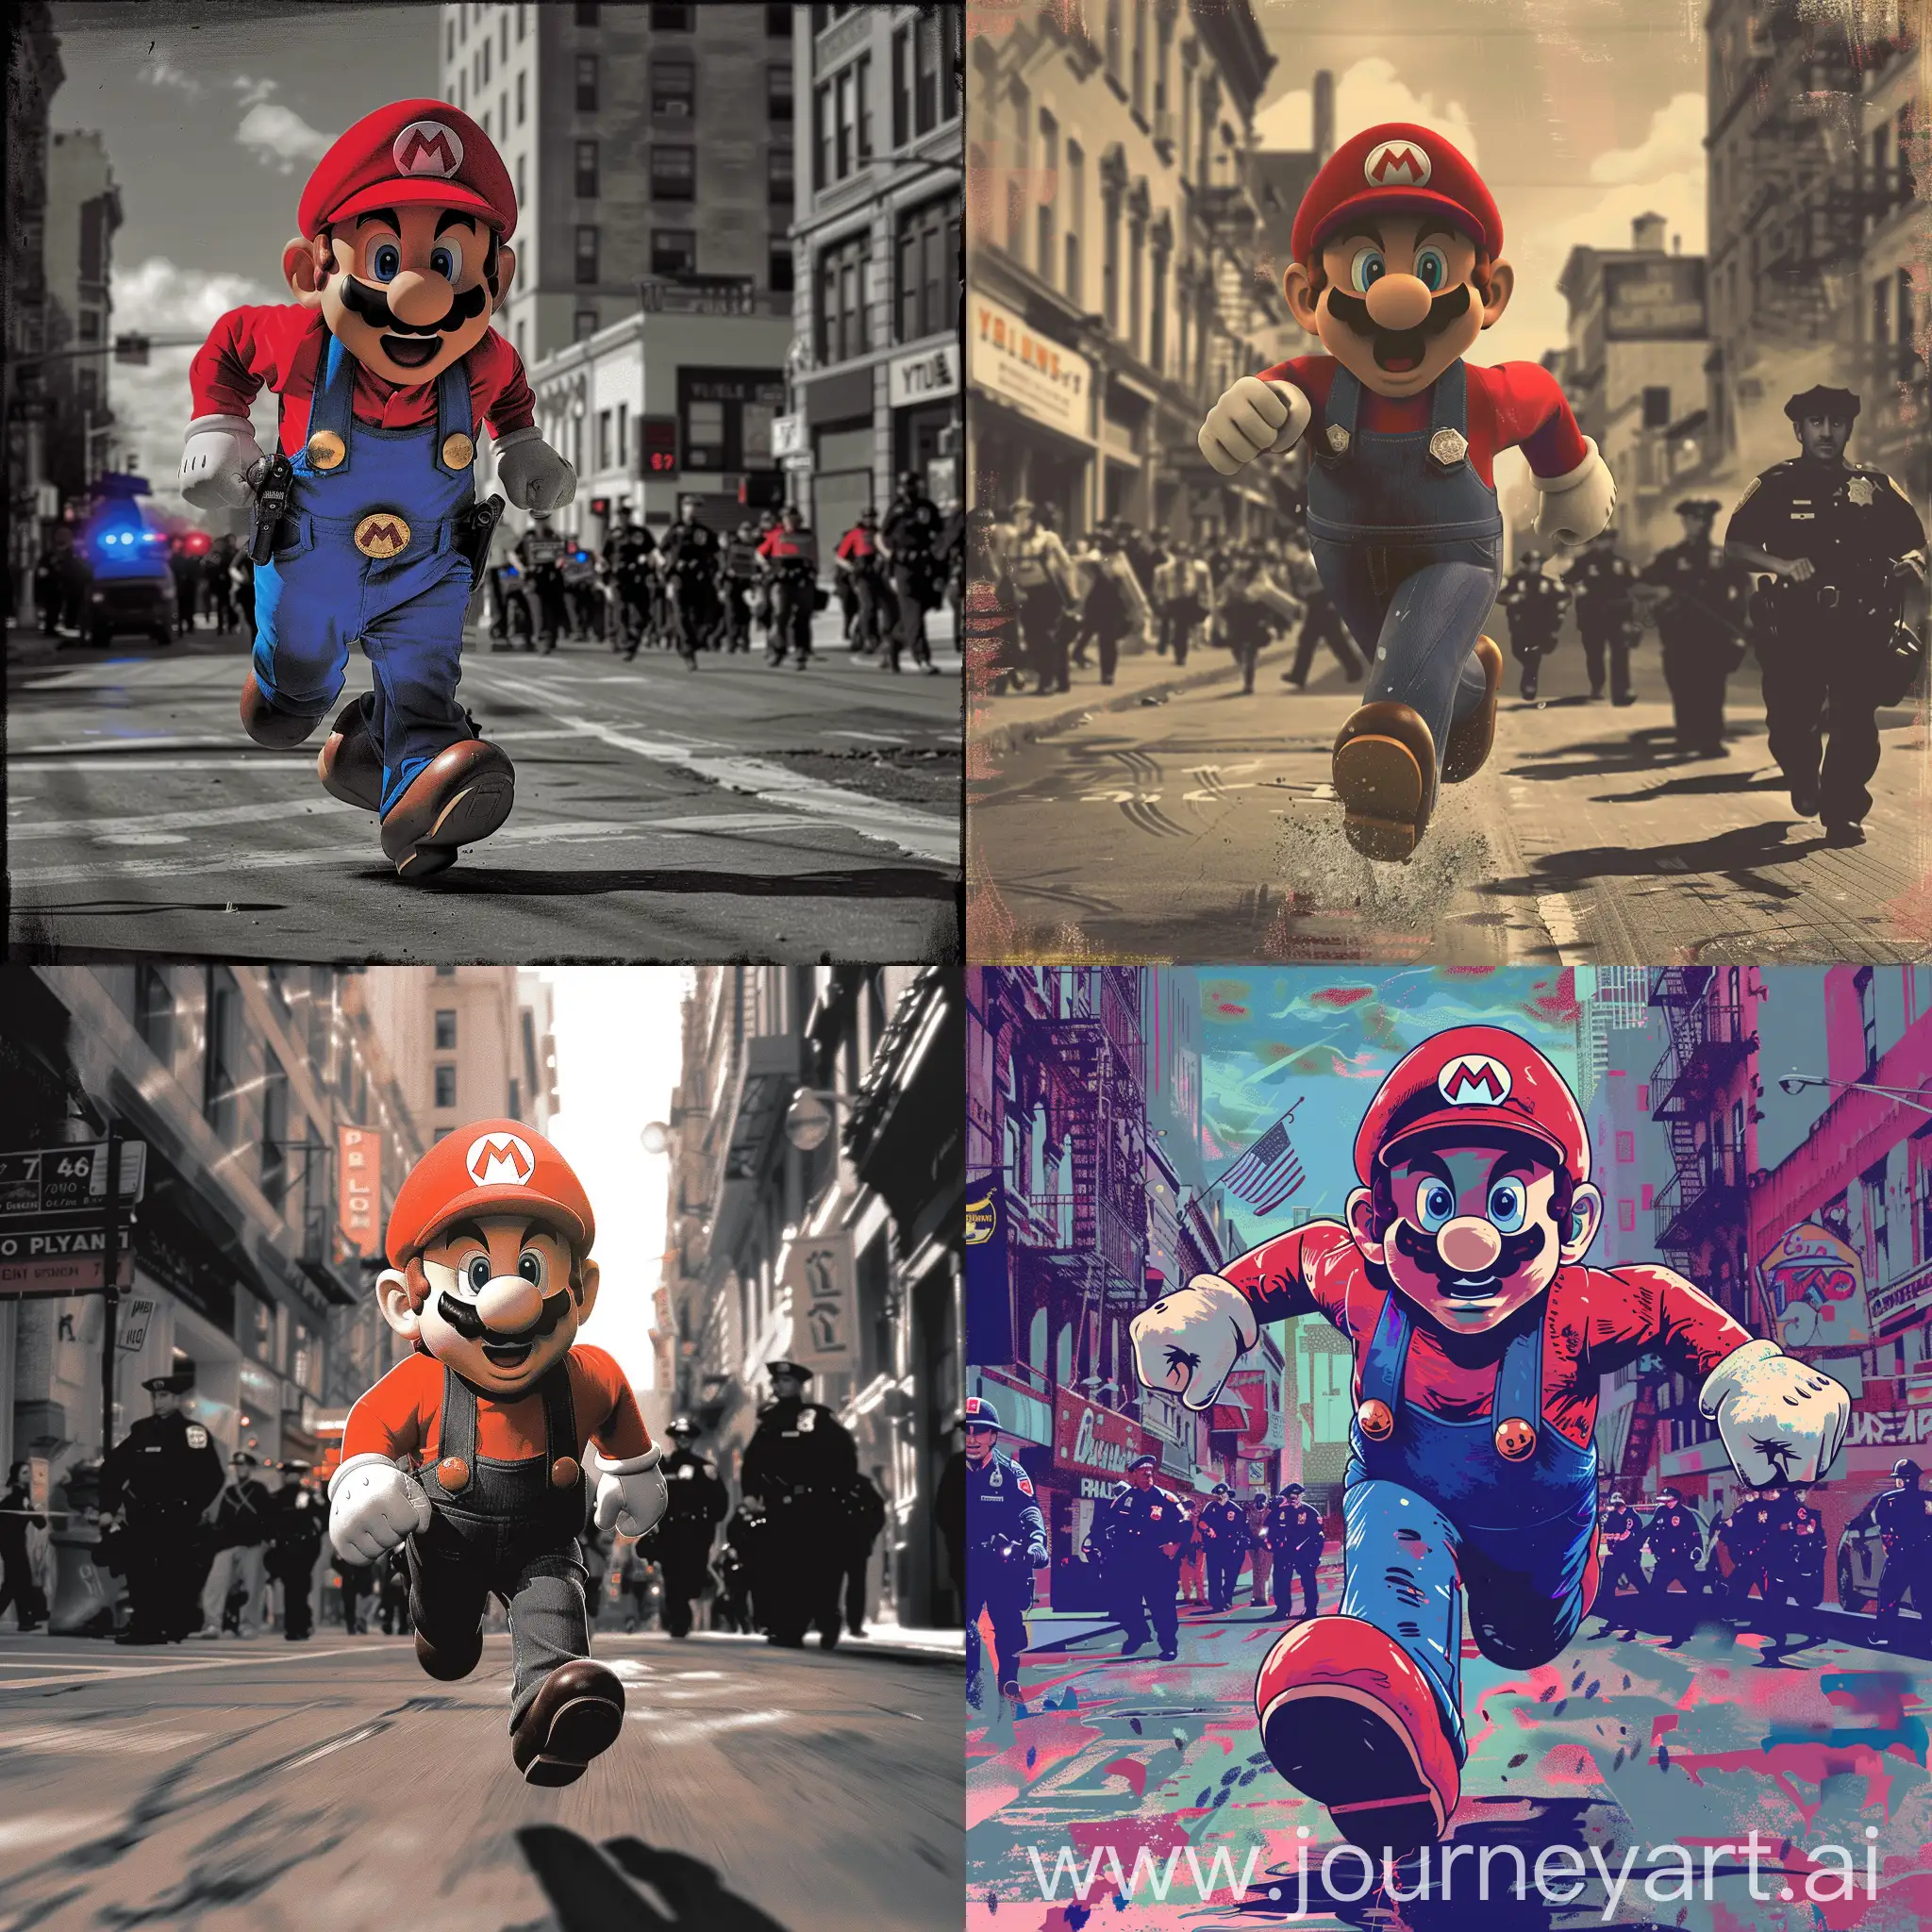 /imagine 20 Mario in Duotone color Running from Police on Ybor City with 7th Avenue --ar 1:1